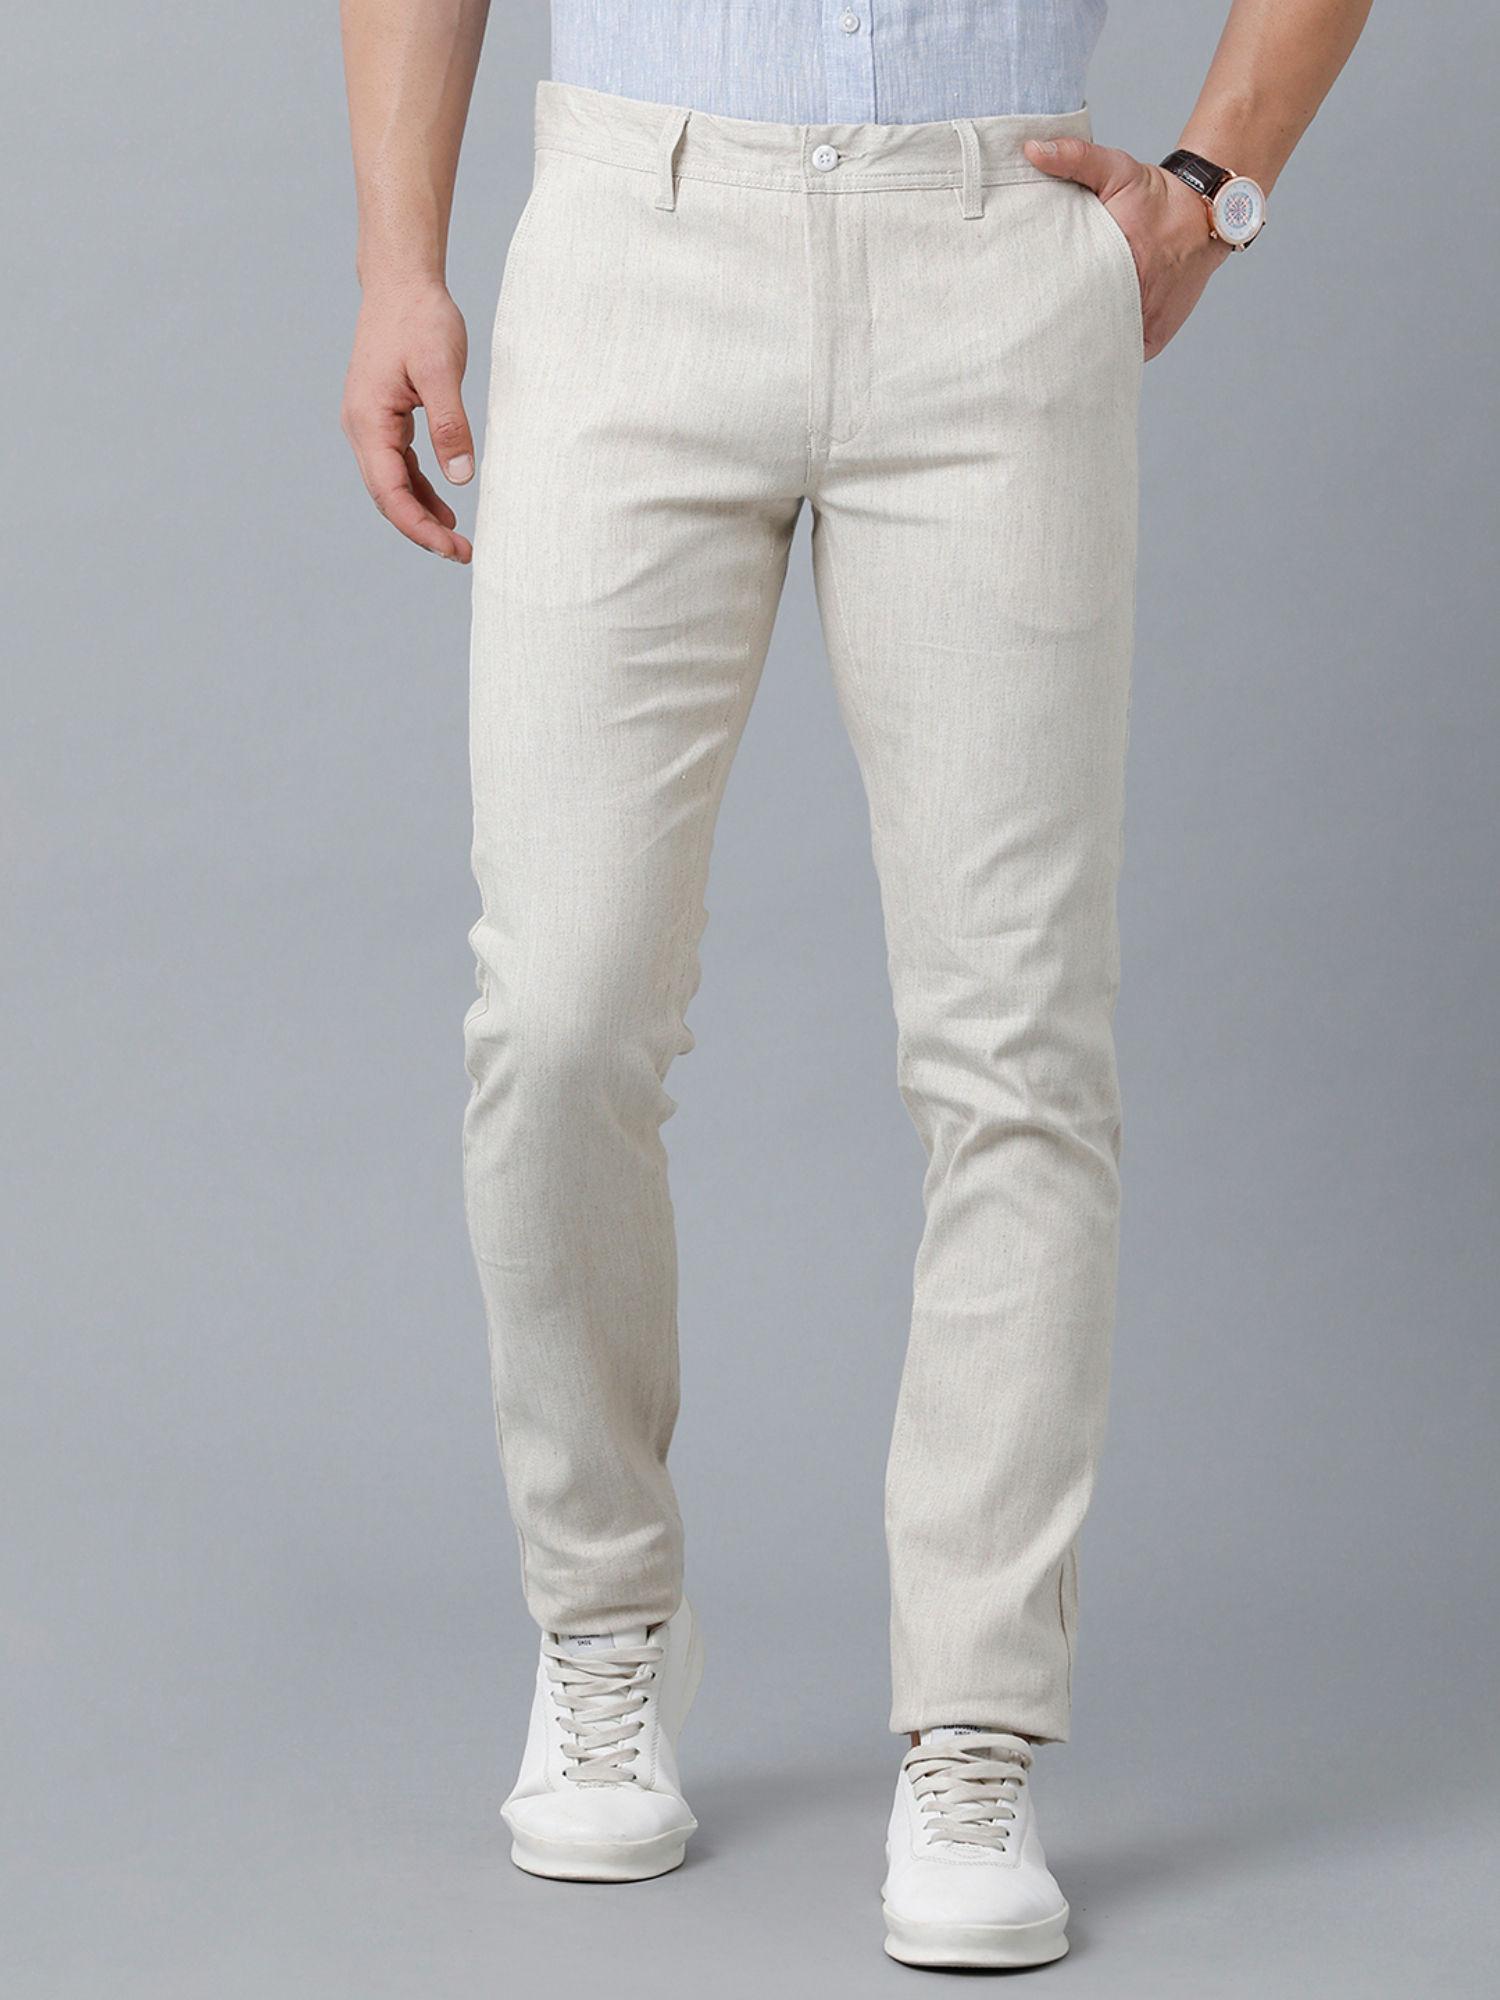 off-white-casual-mid-rise-active-waist-trouser-for-men